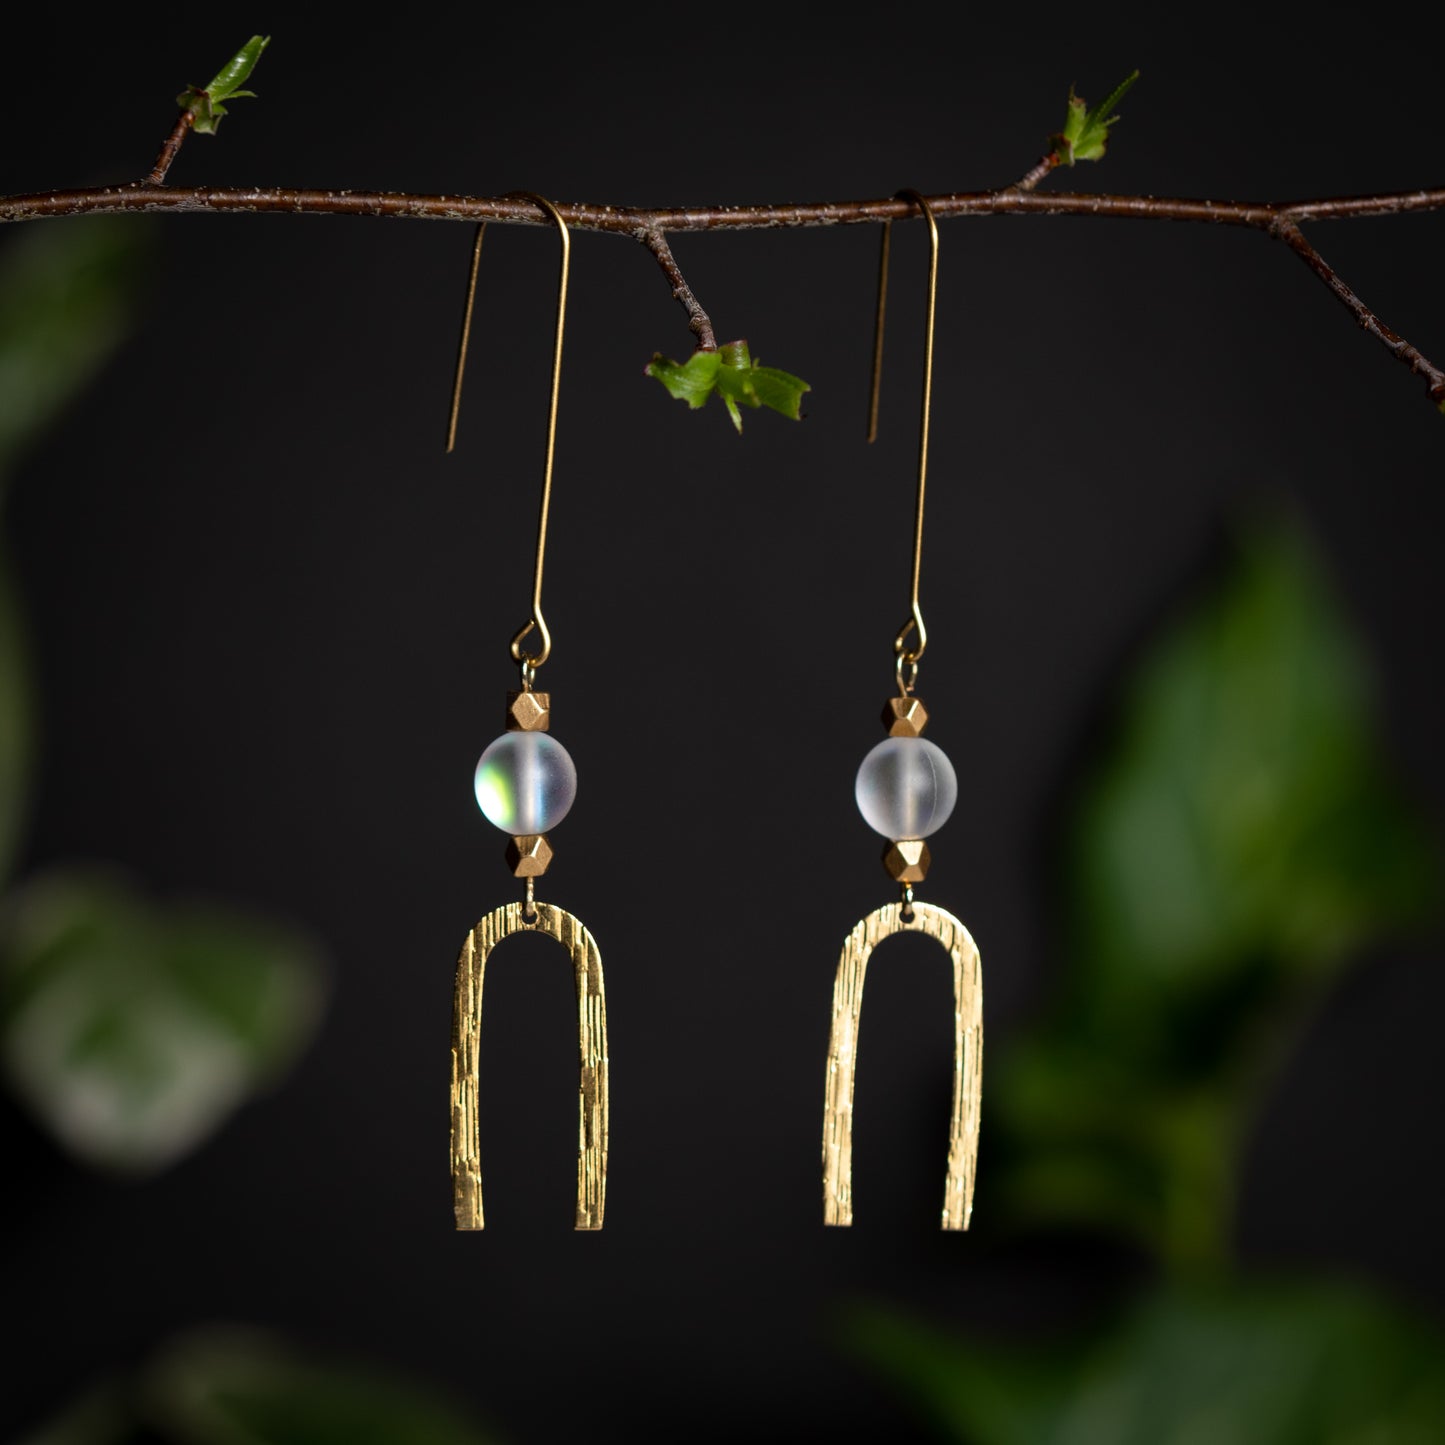 Brushed Gold Arch Earrings with Sunny Spectrolite